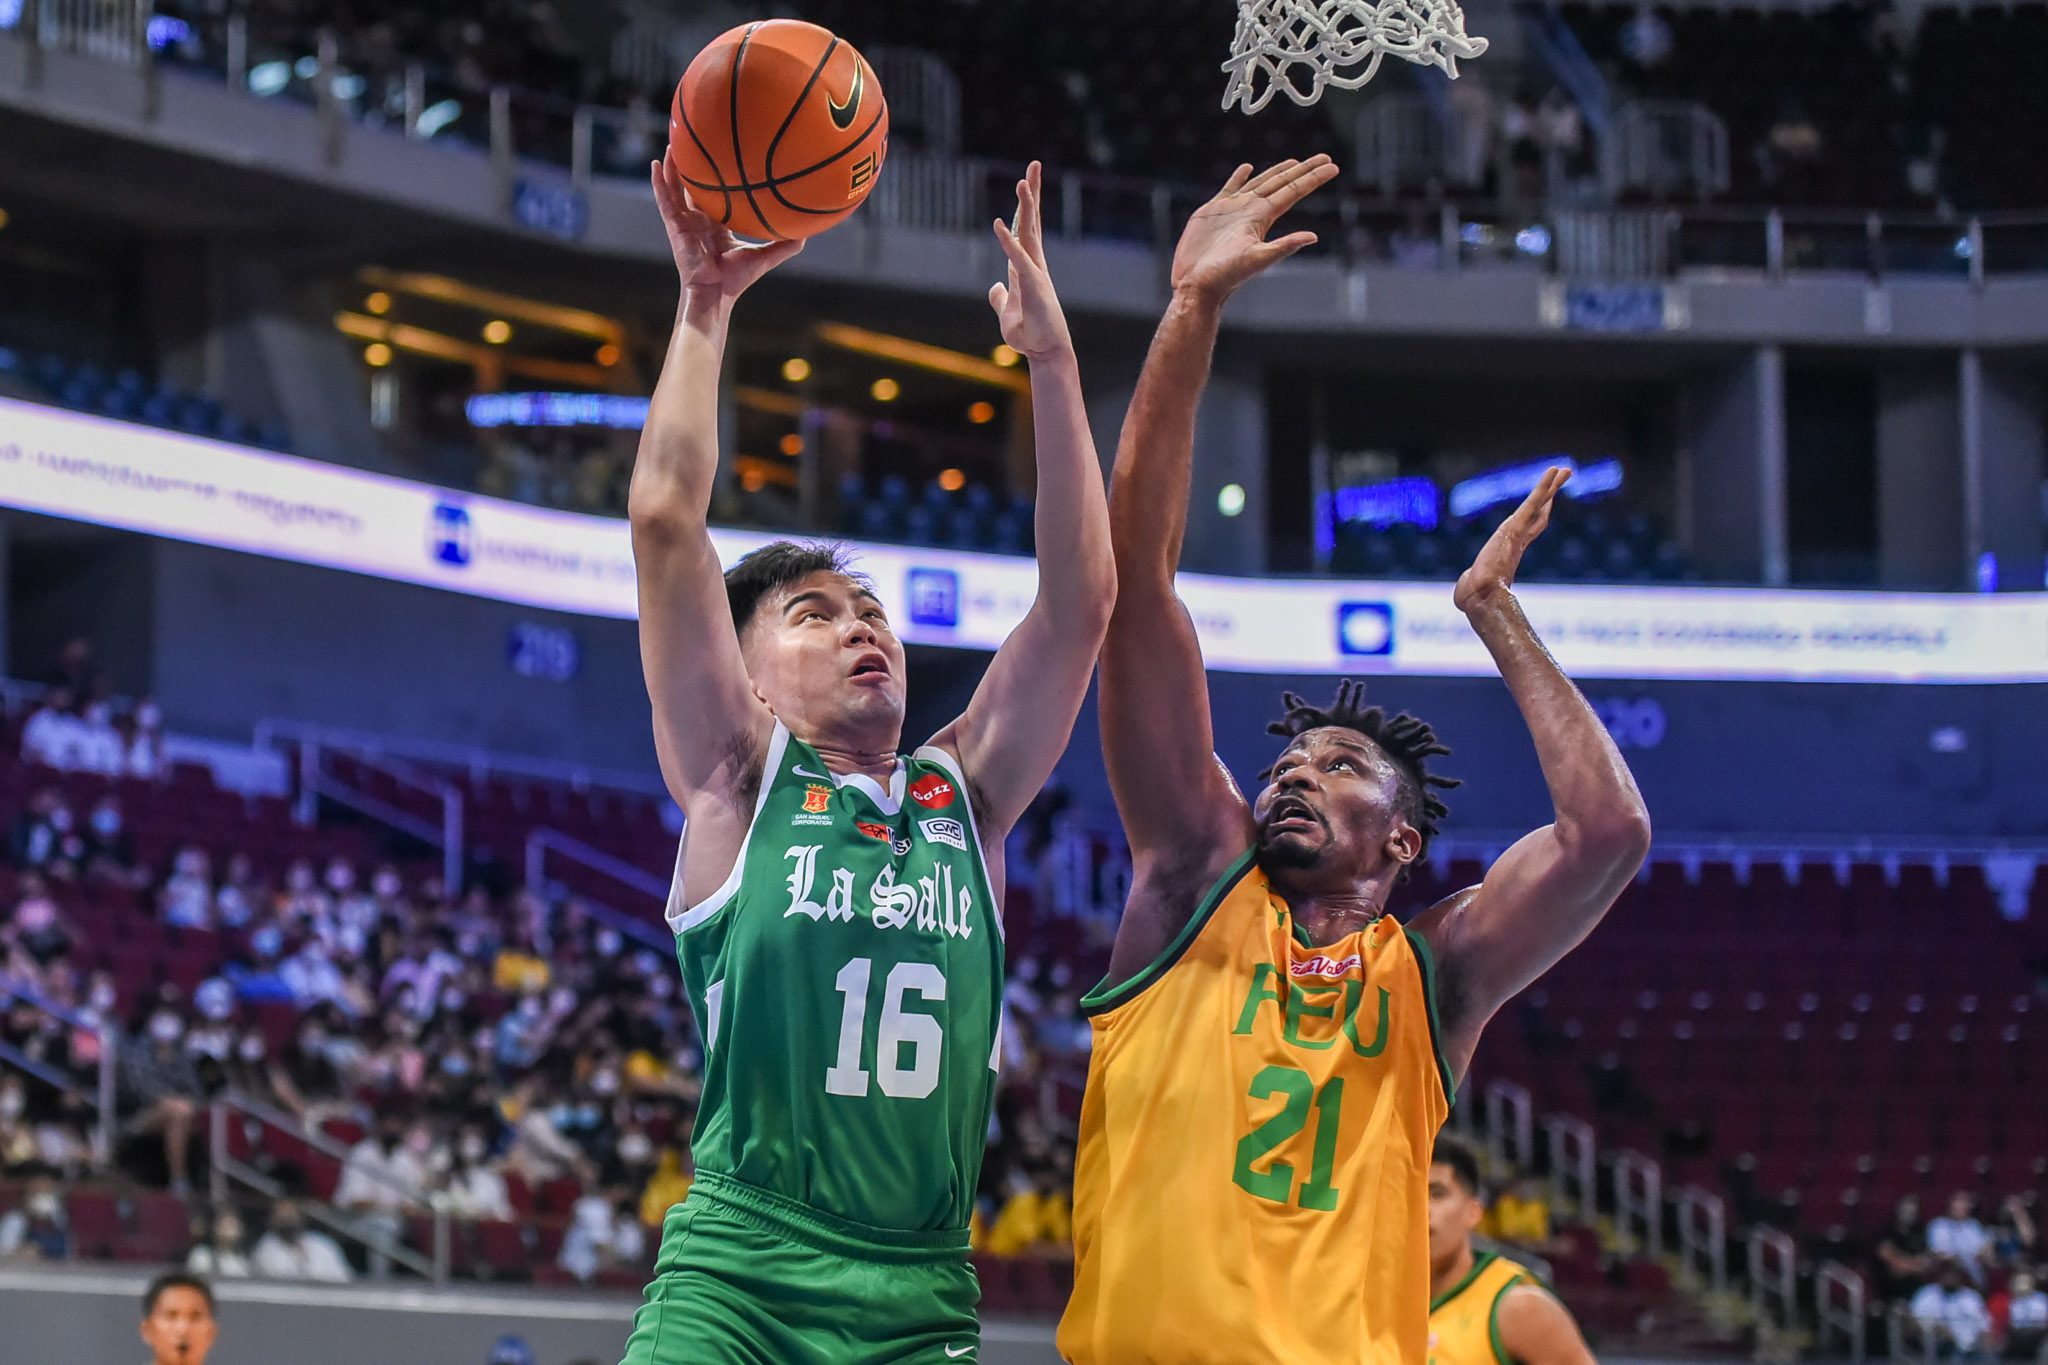 La Salle’s Austria, UST’s Faye suspended for one game